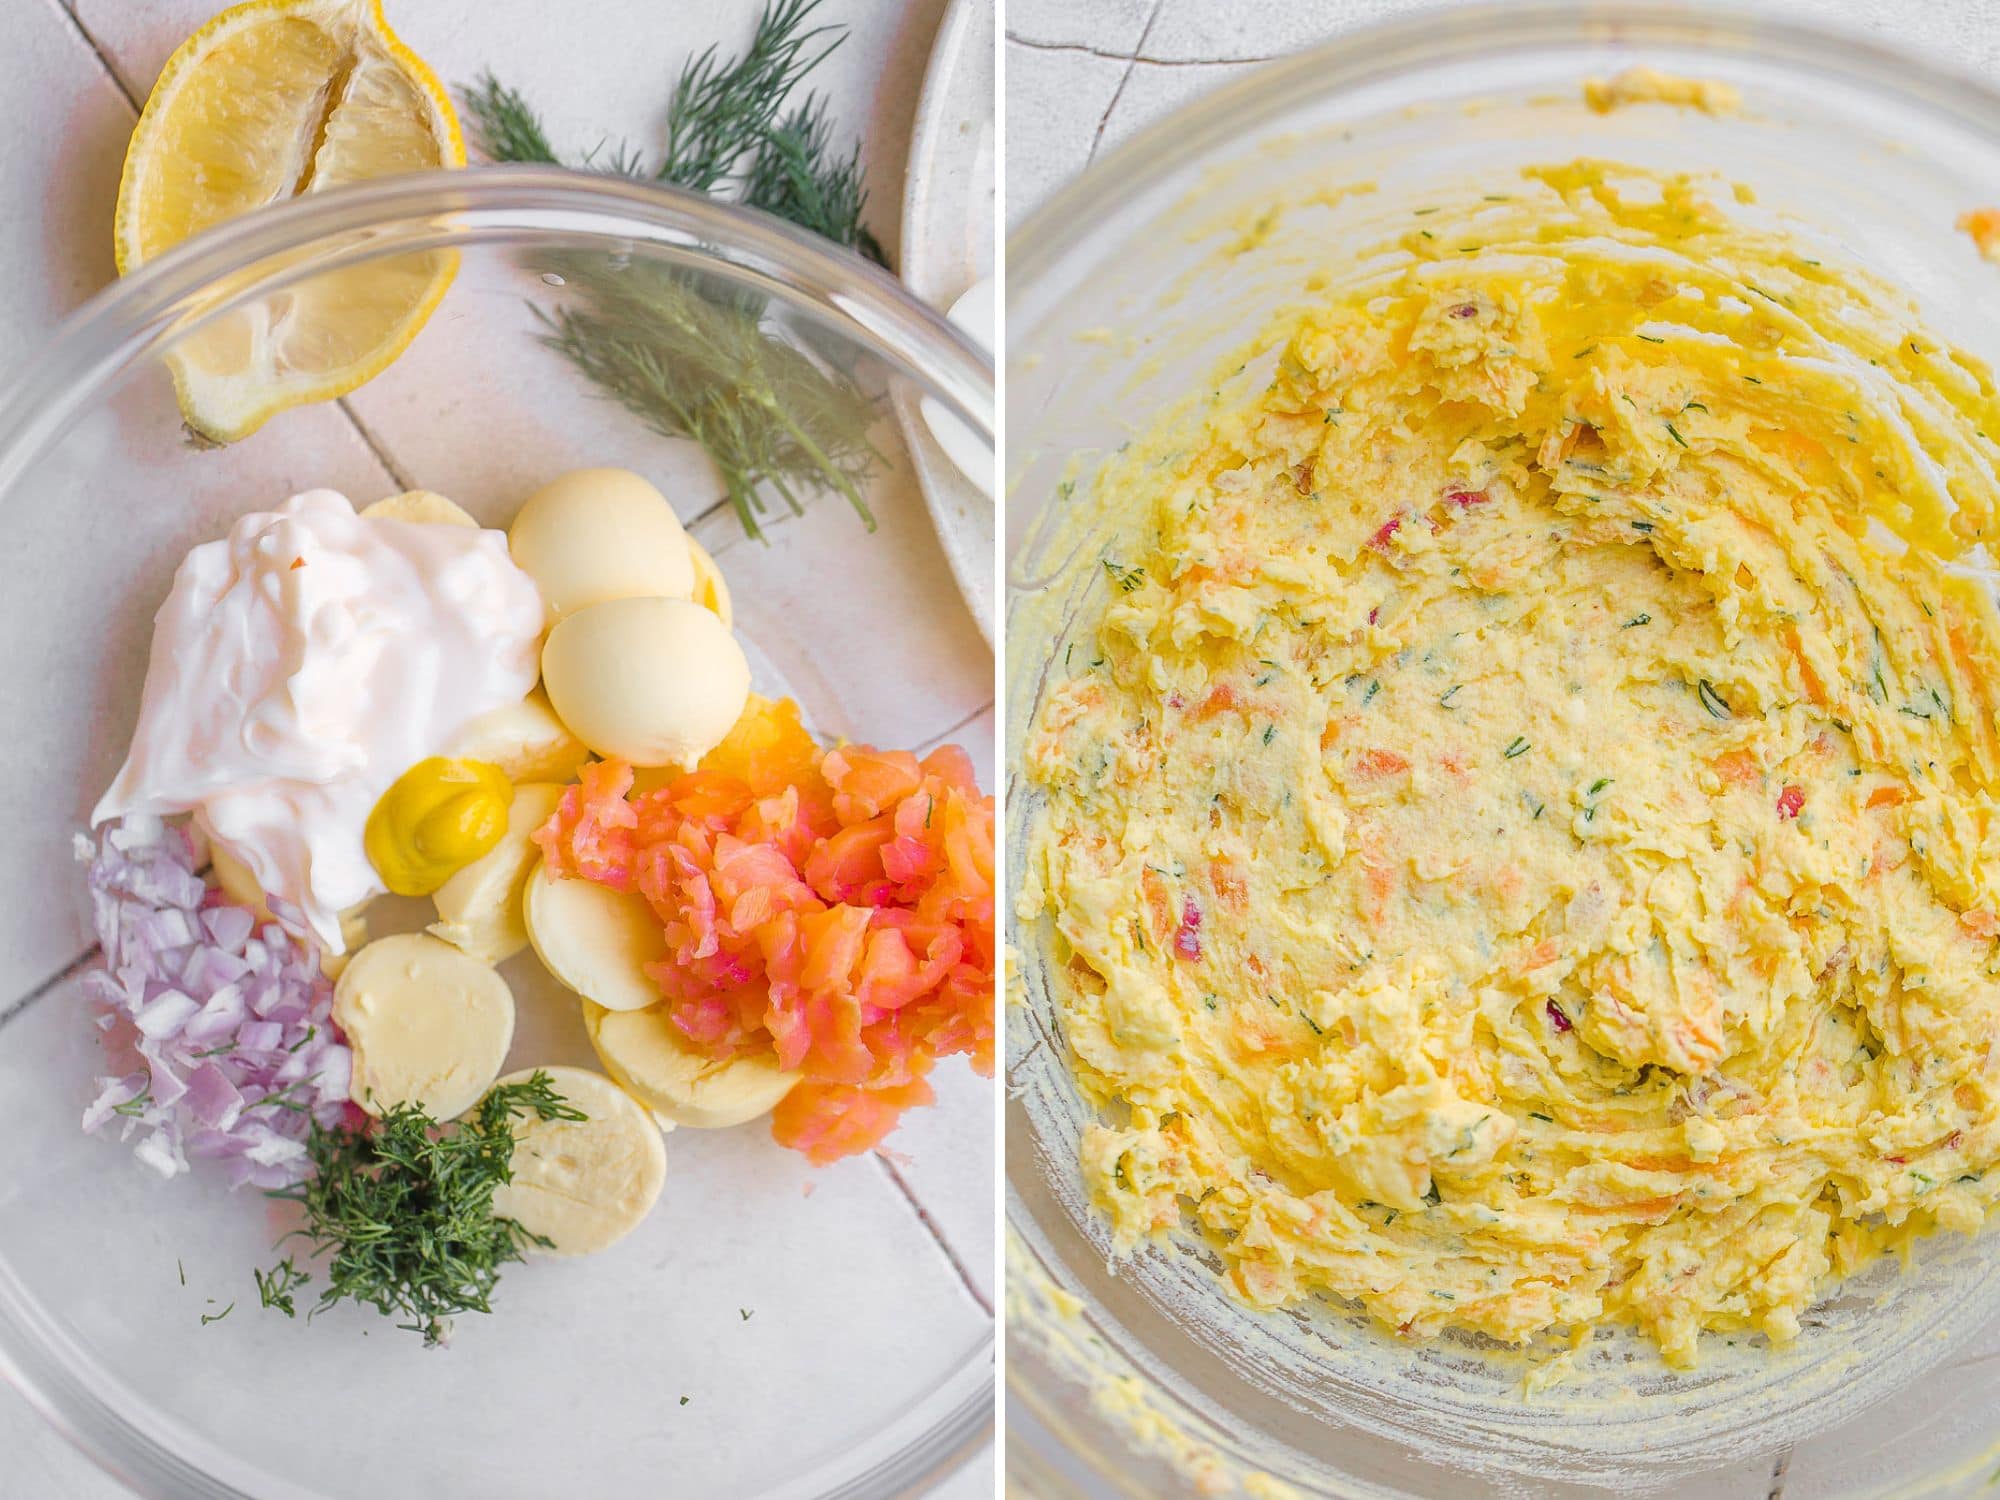 Deviled egg ingredients with smoked salmon.